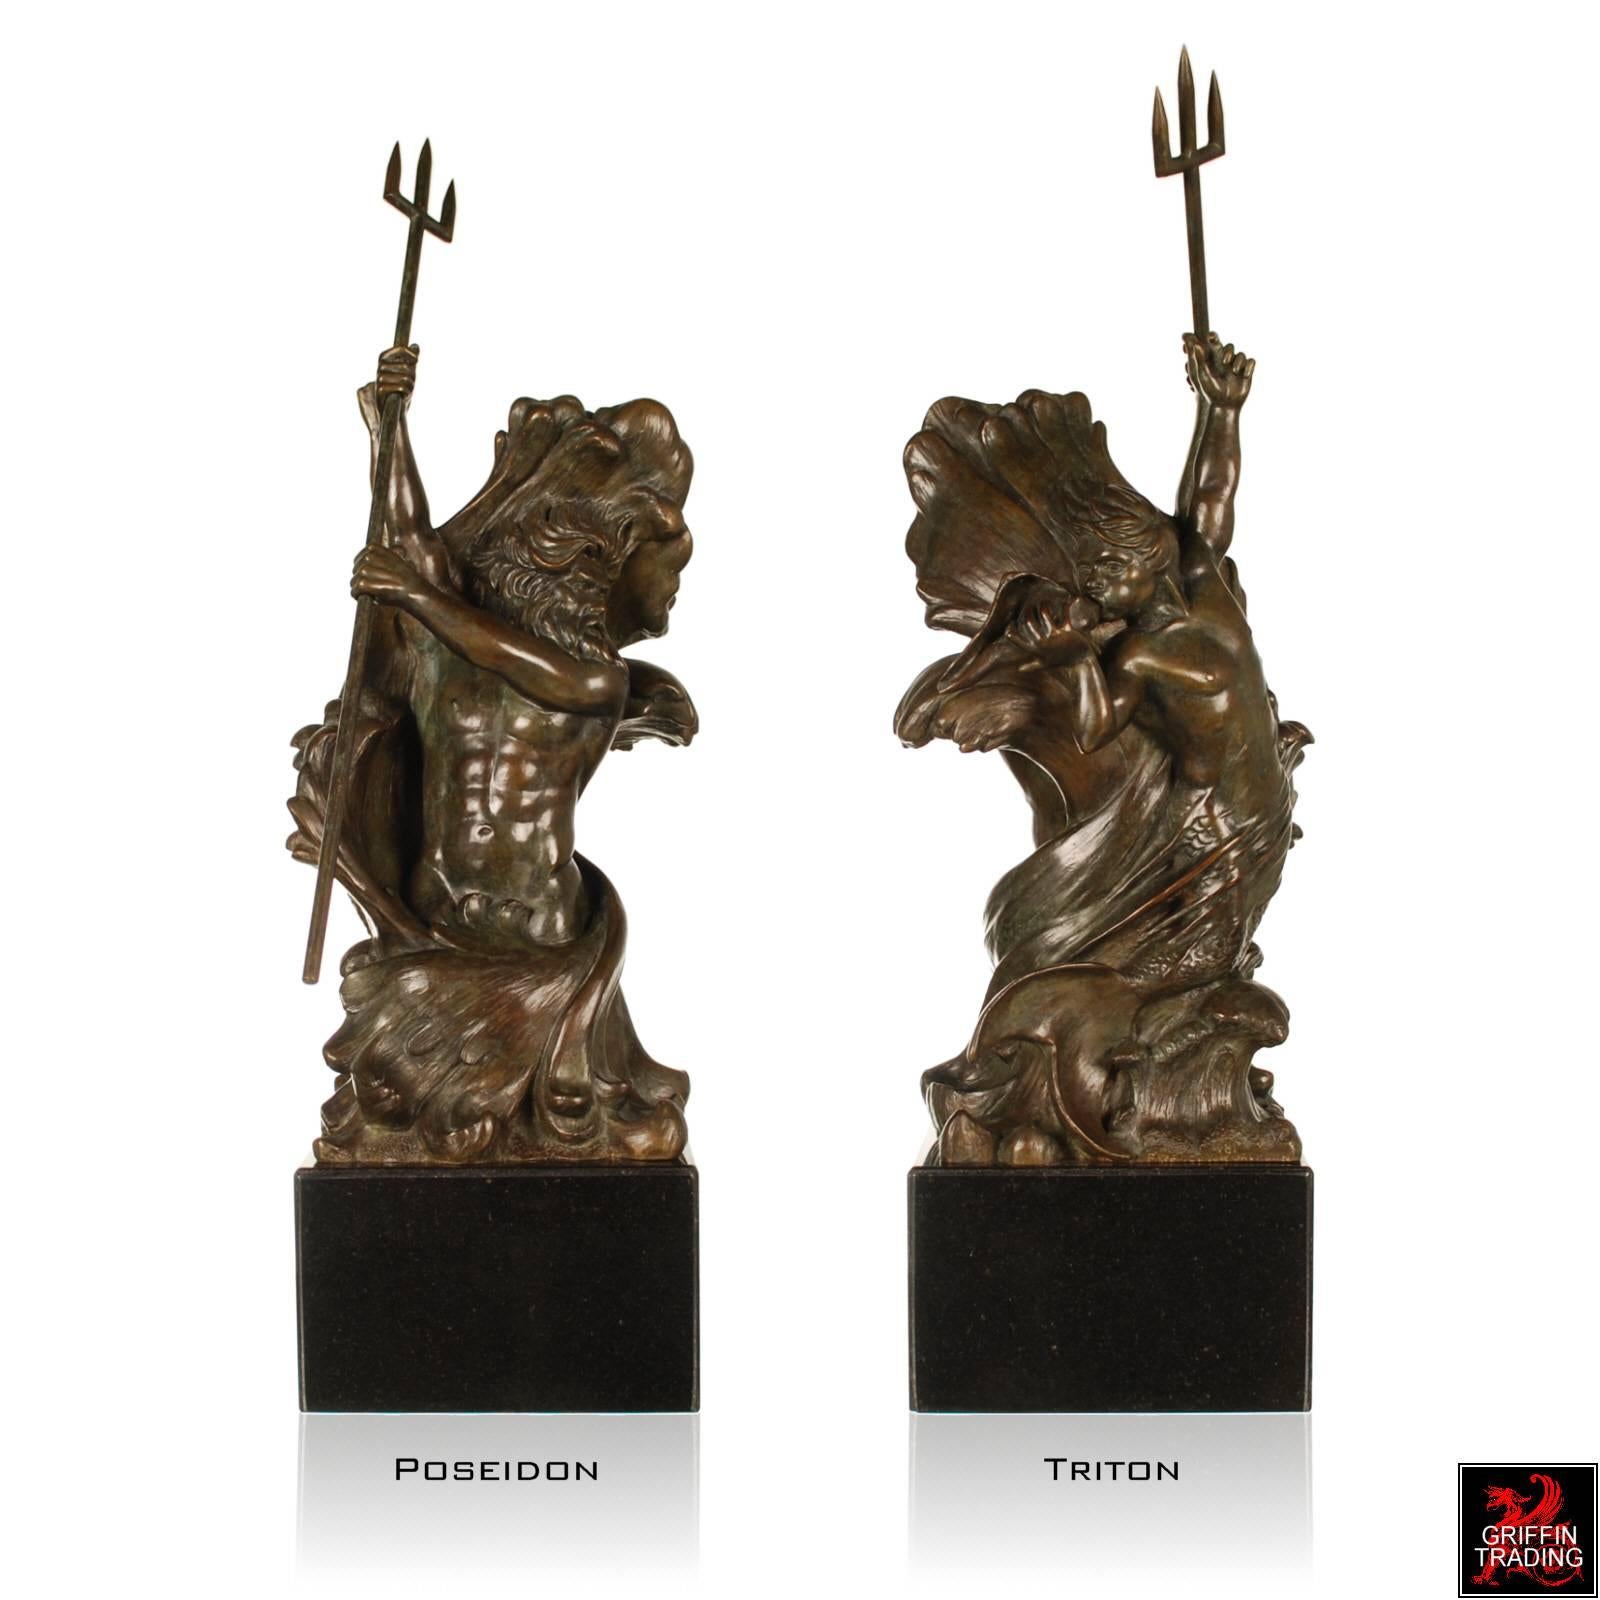 This exquisite bronze sculpture depicts the Greek god Poseidon with his Trident in hand on one side and his son Triton depicted on the other side. The artistic ability of the sculptor to capture both of these Greek gods in ocean swept waves as one